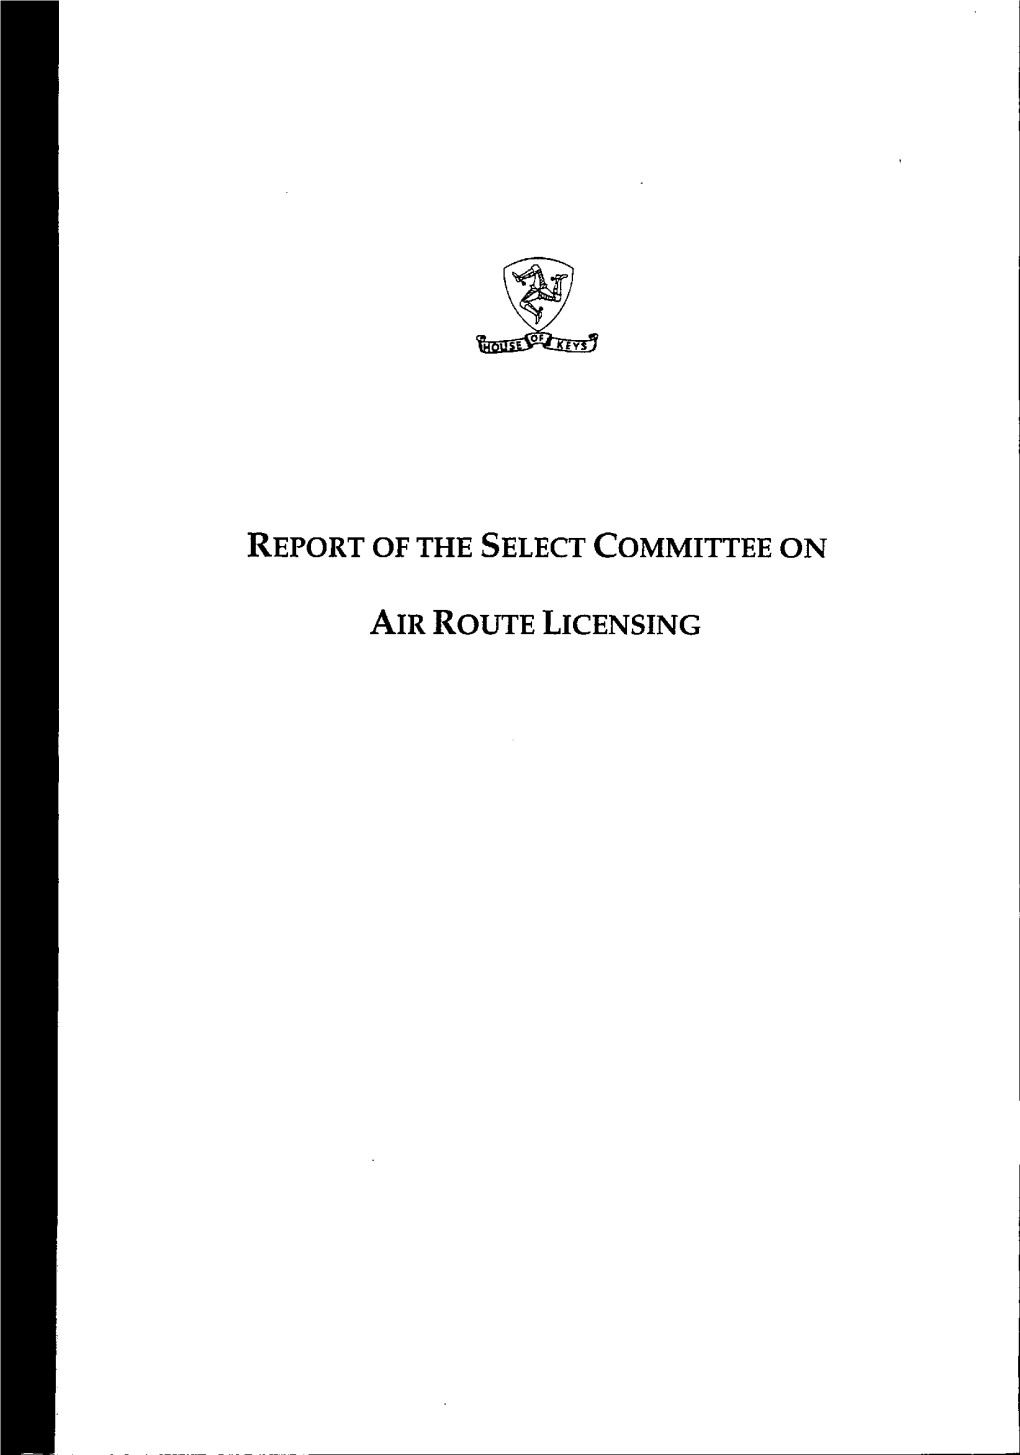 Report of the Select Committee on Air Route Licensing